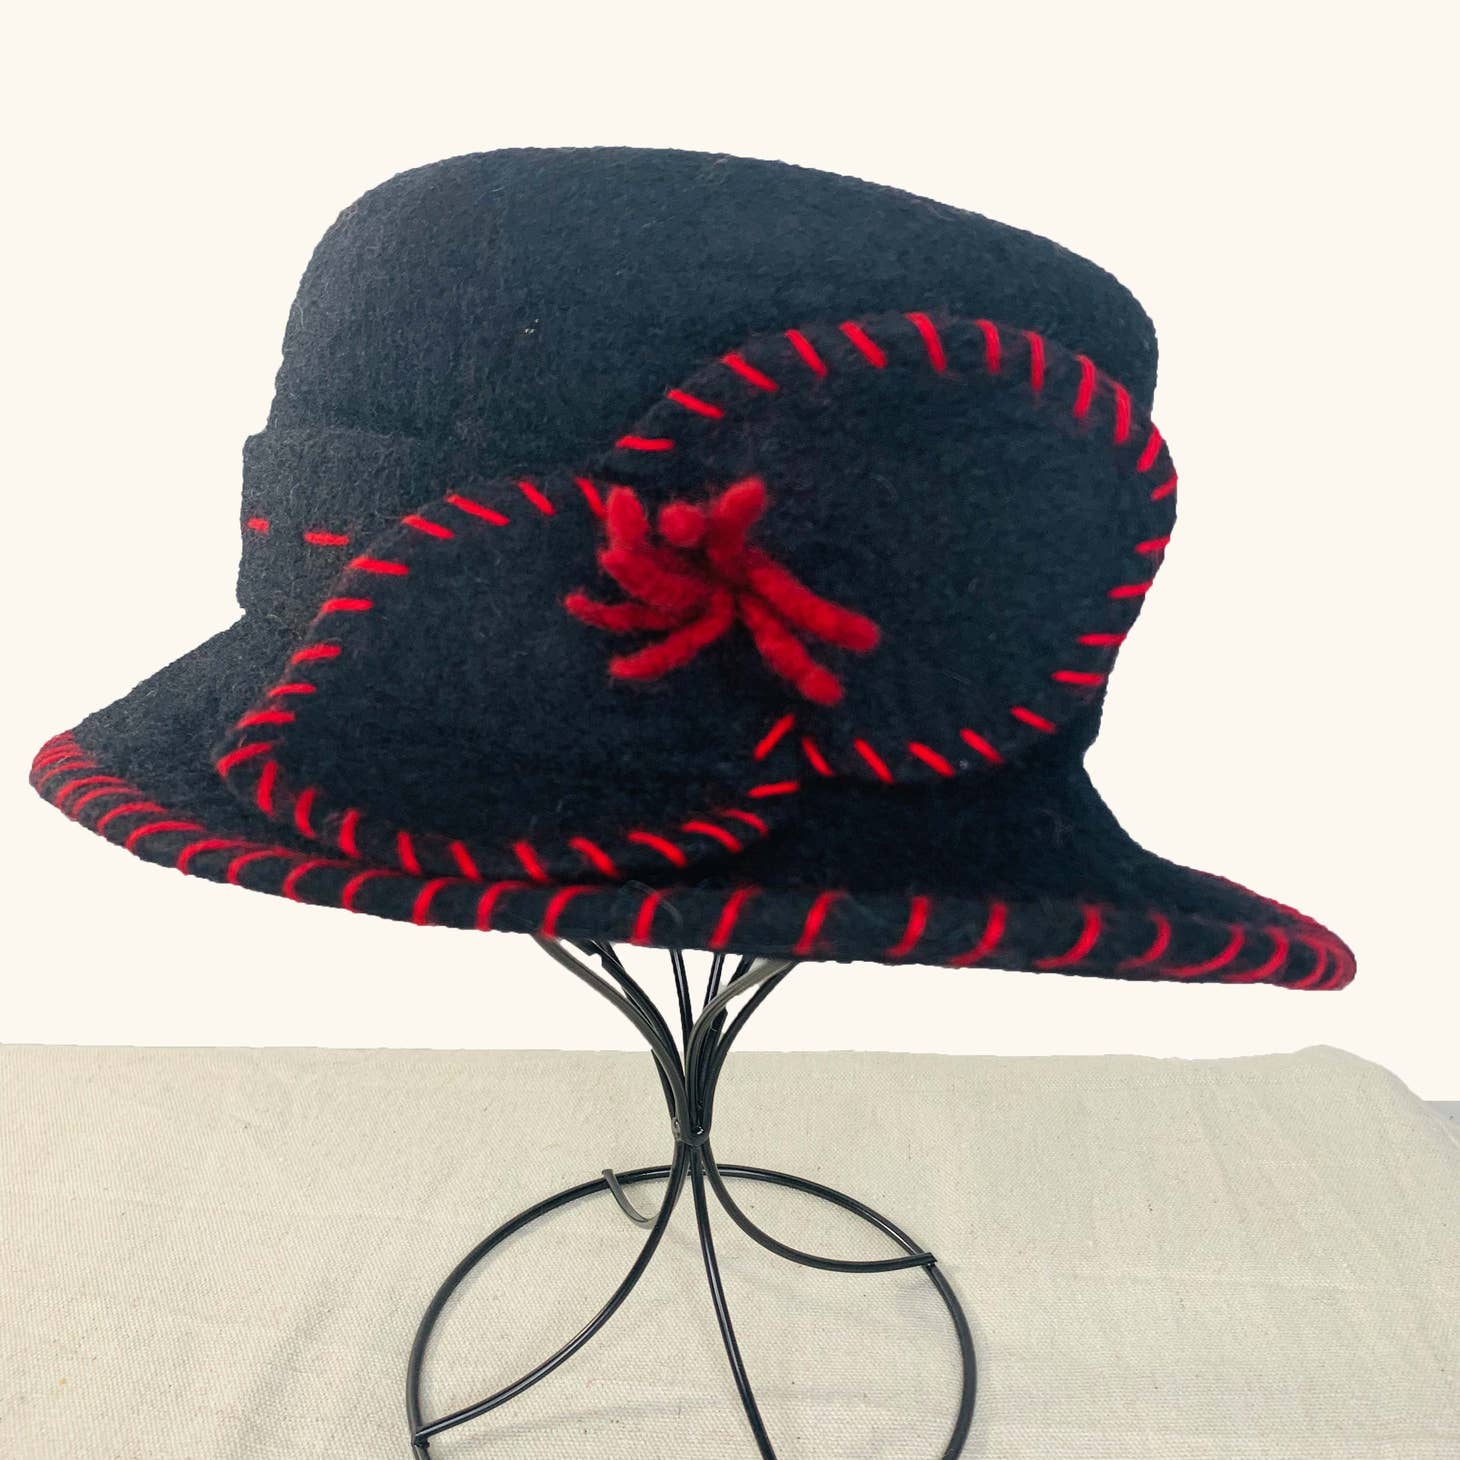 Boiled Wool Women's Hat, Black with Red Contrast